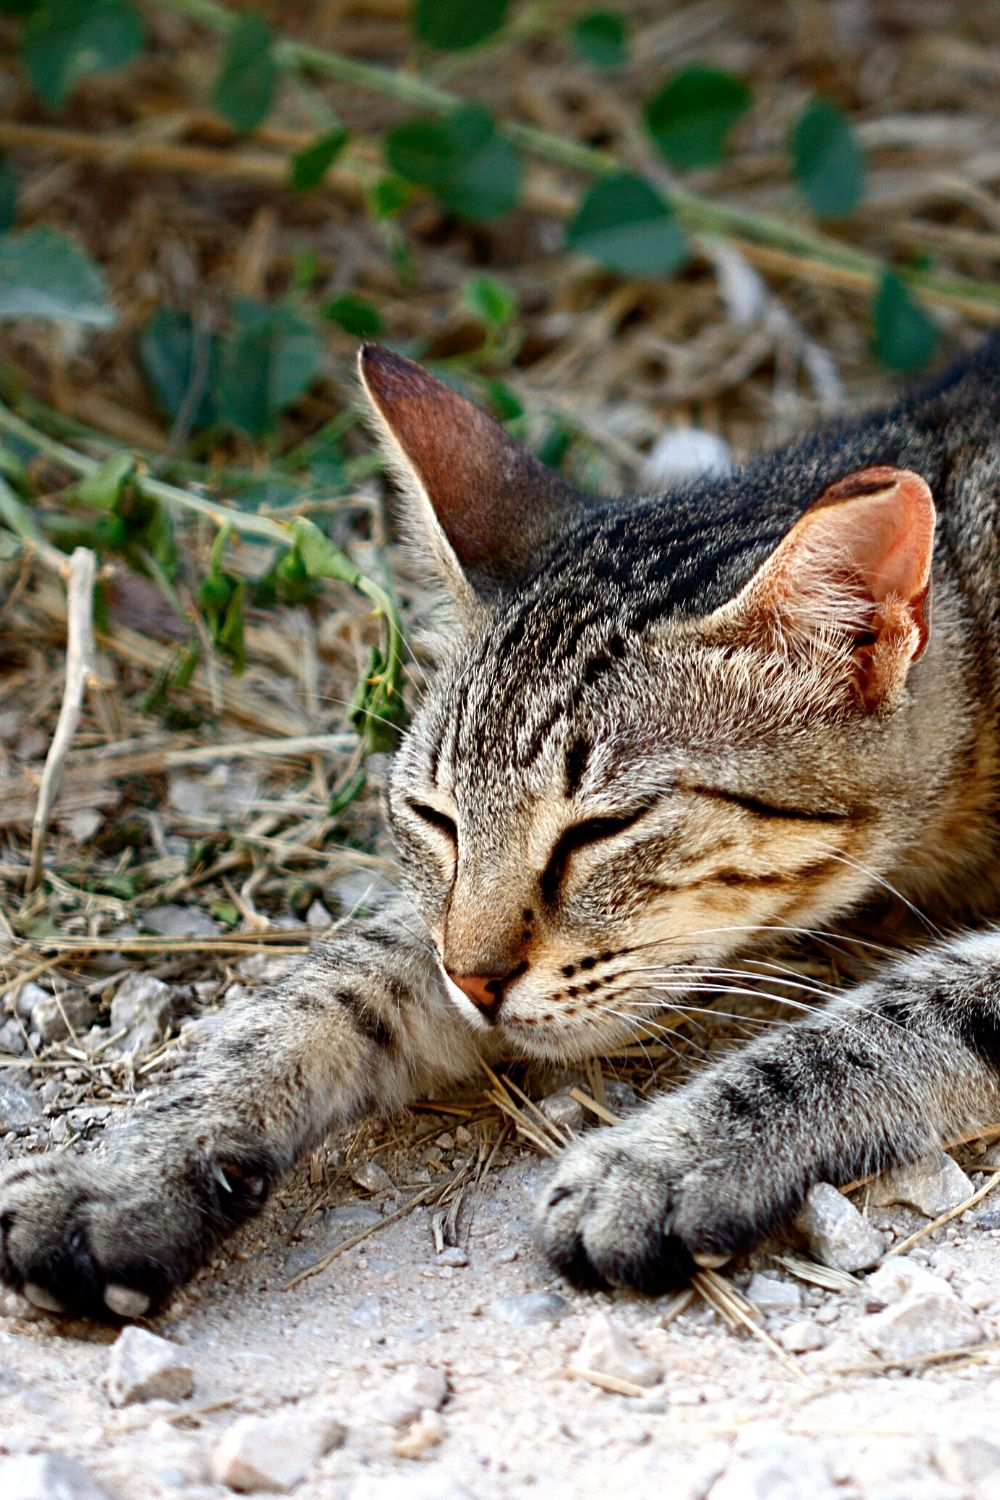 Feral cats won't sleep in areas where humans are as they're not socialized with them